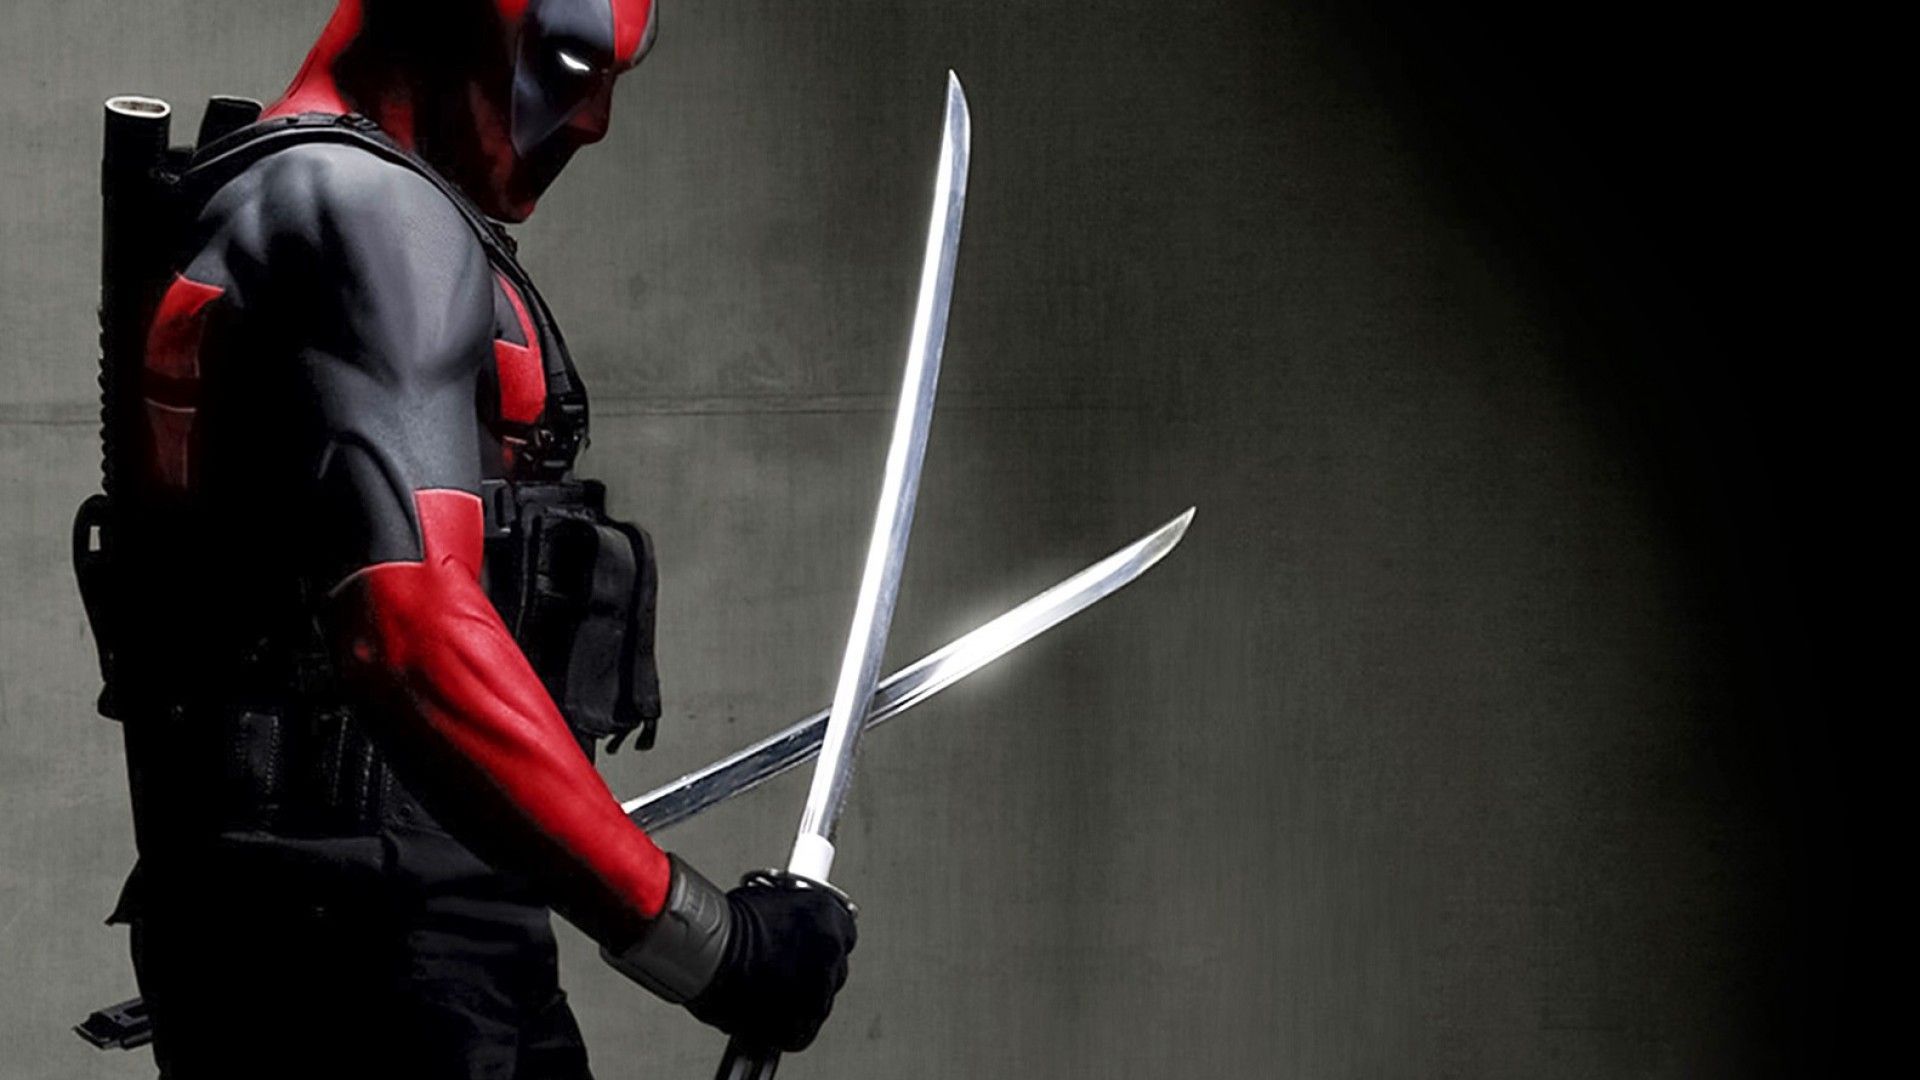 Cool Wallpapers 1920x1080 with Deadpool Character | HD Wallpapers ...